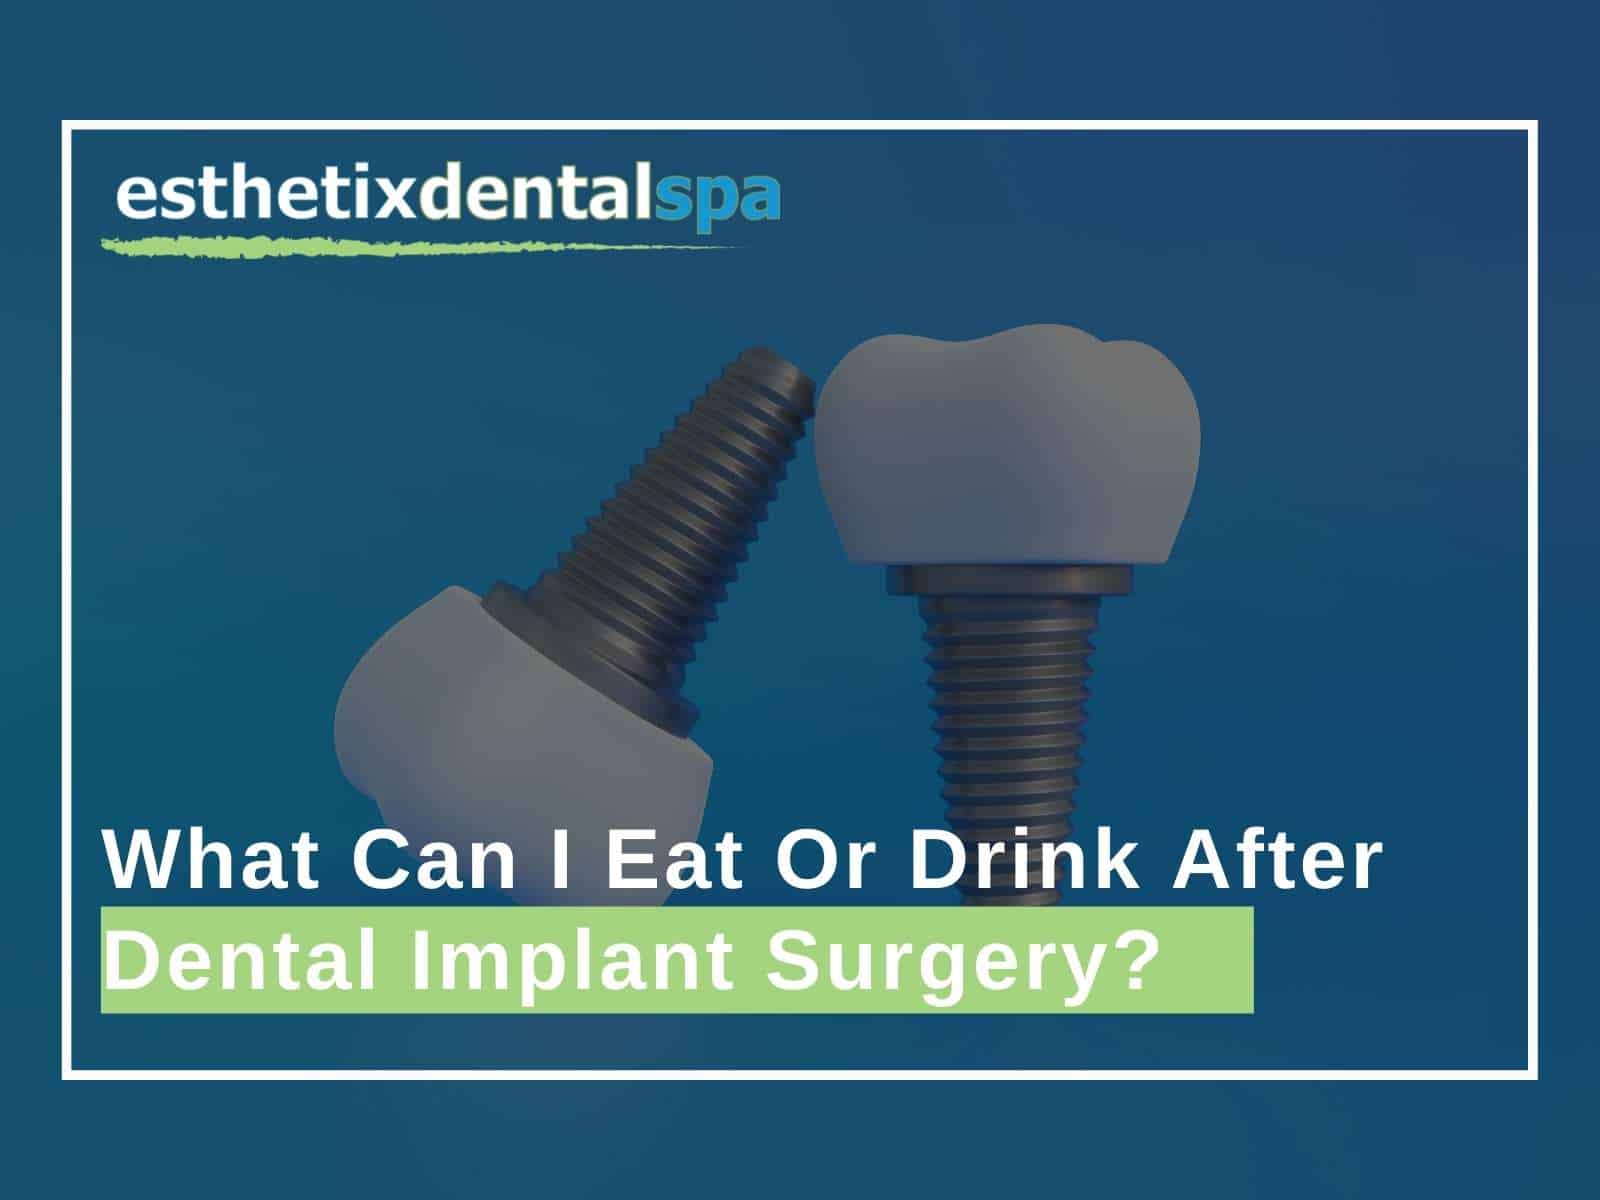 What Can I Eat Or Drink After Dental Implant Surgery?